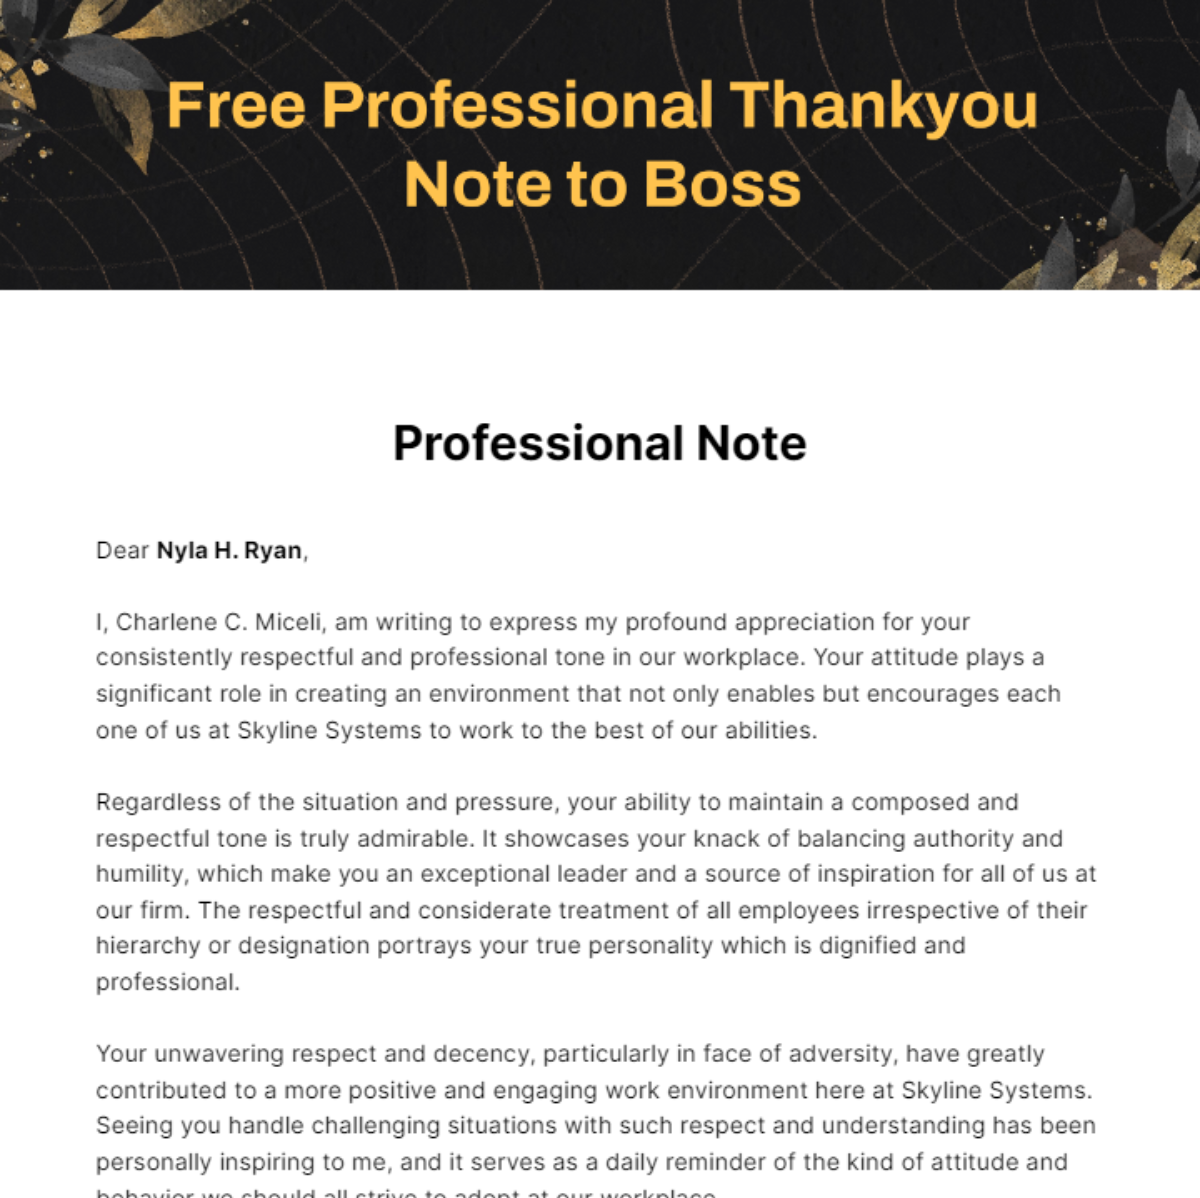 Free Professional Thankyou Note to Boss Template